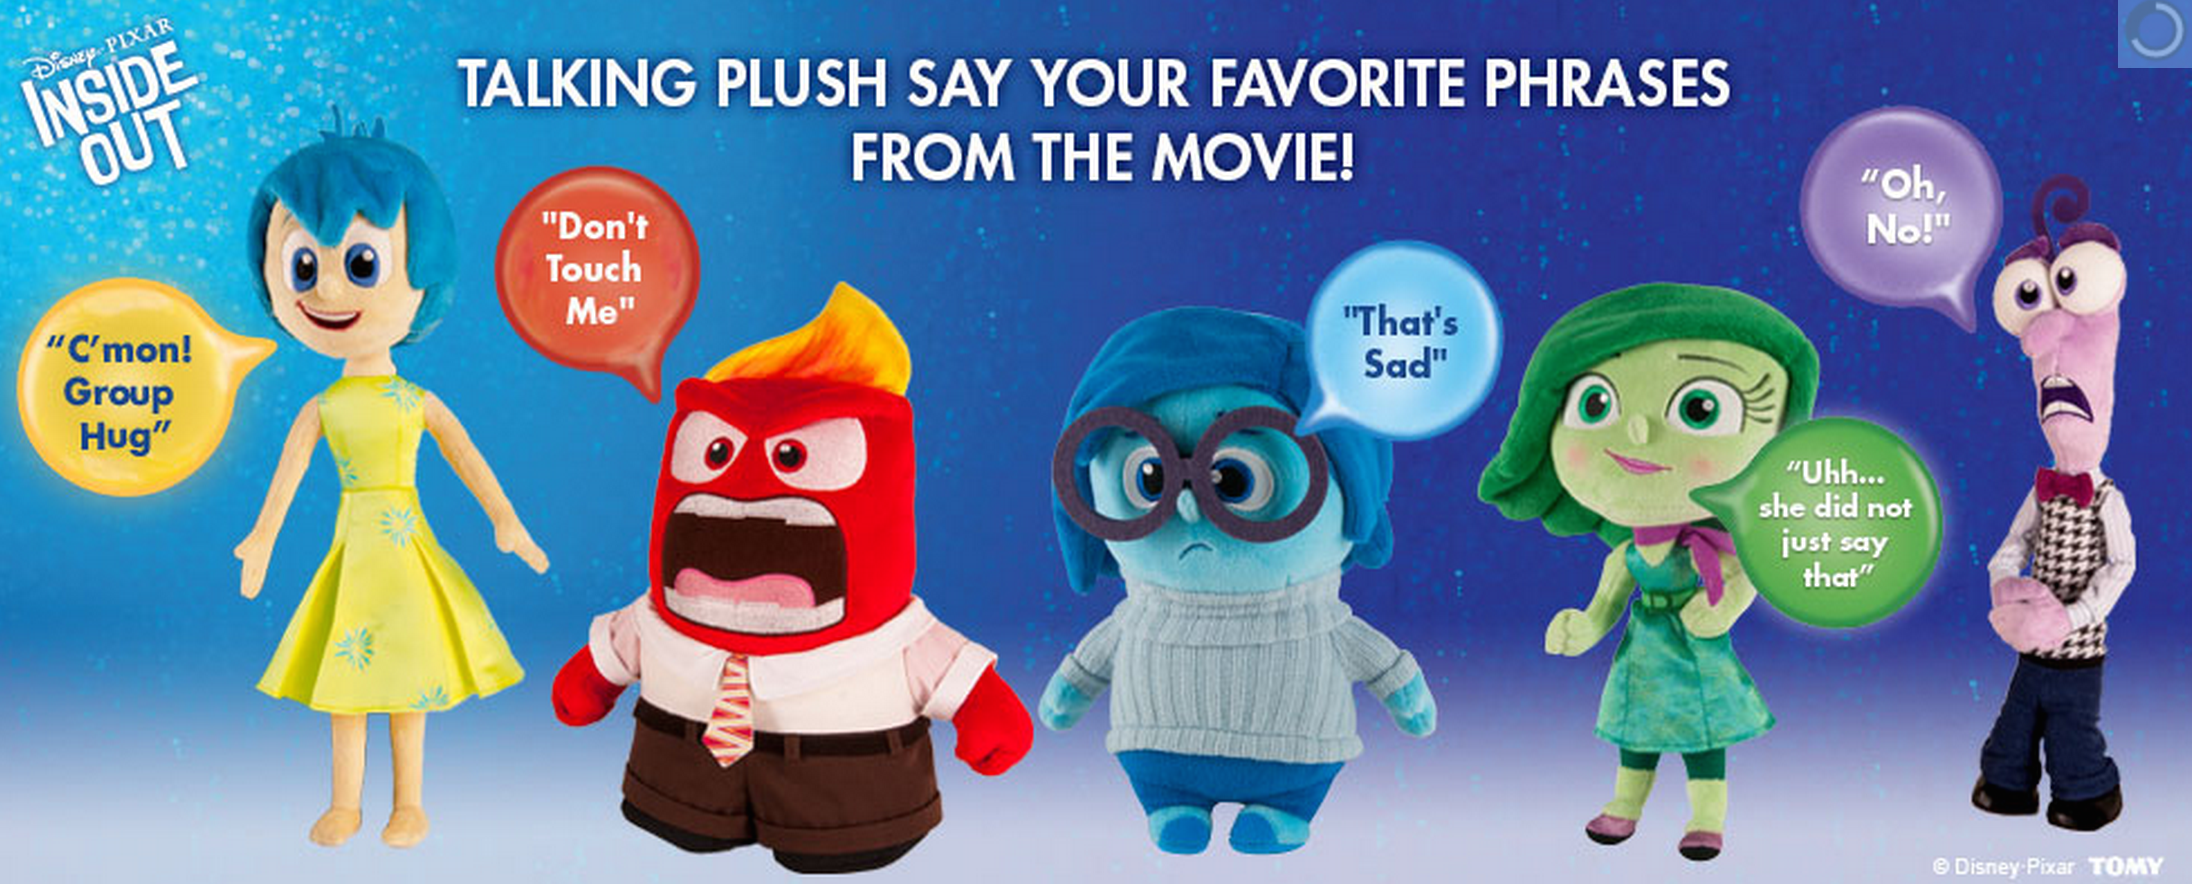 Inside Out Talking Plush Toy Review 